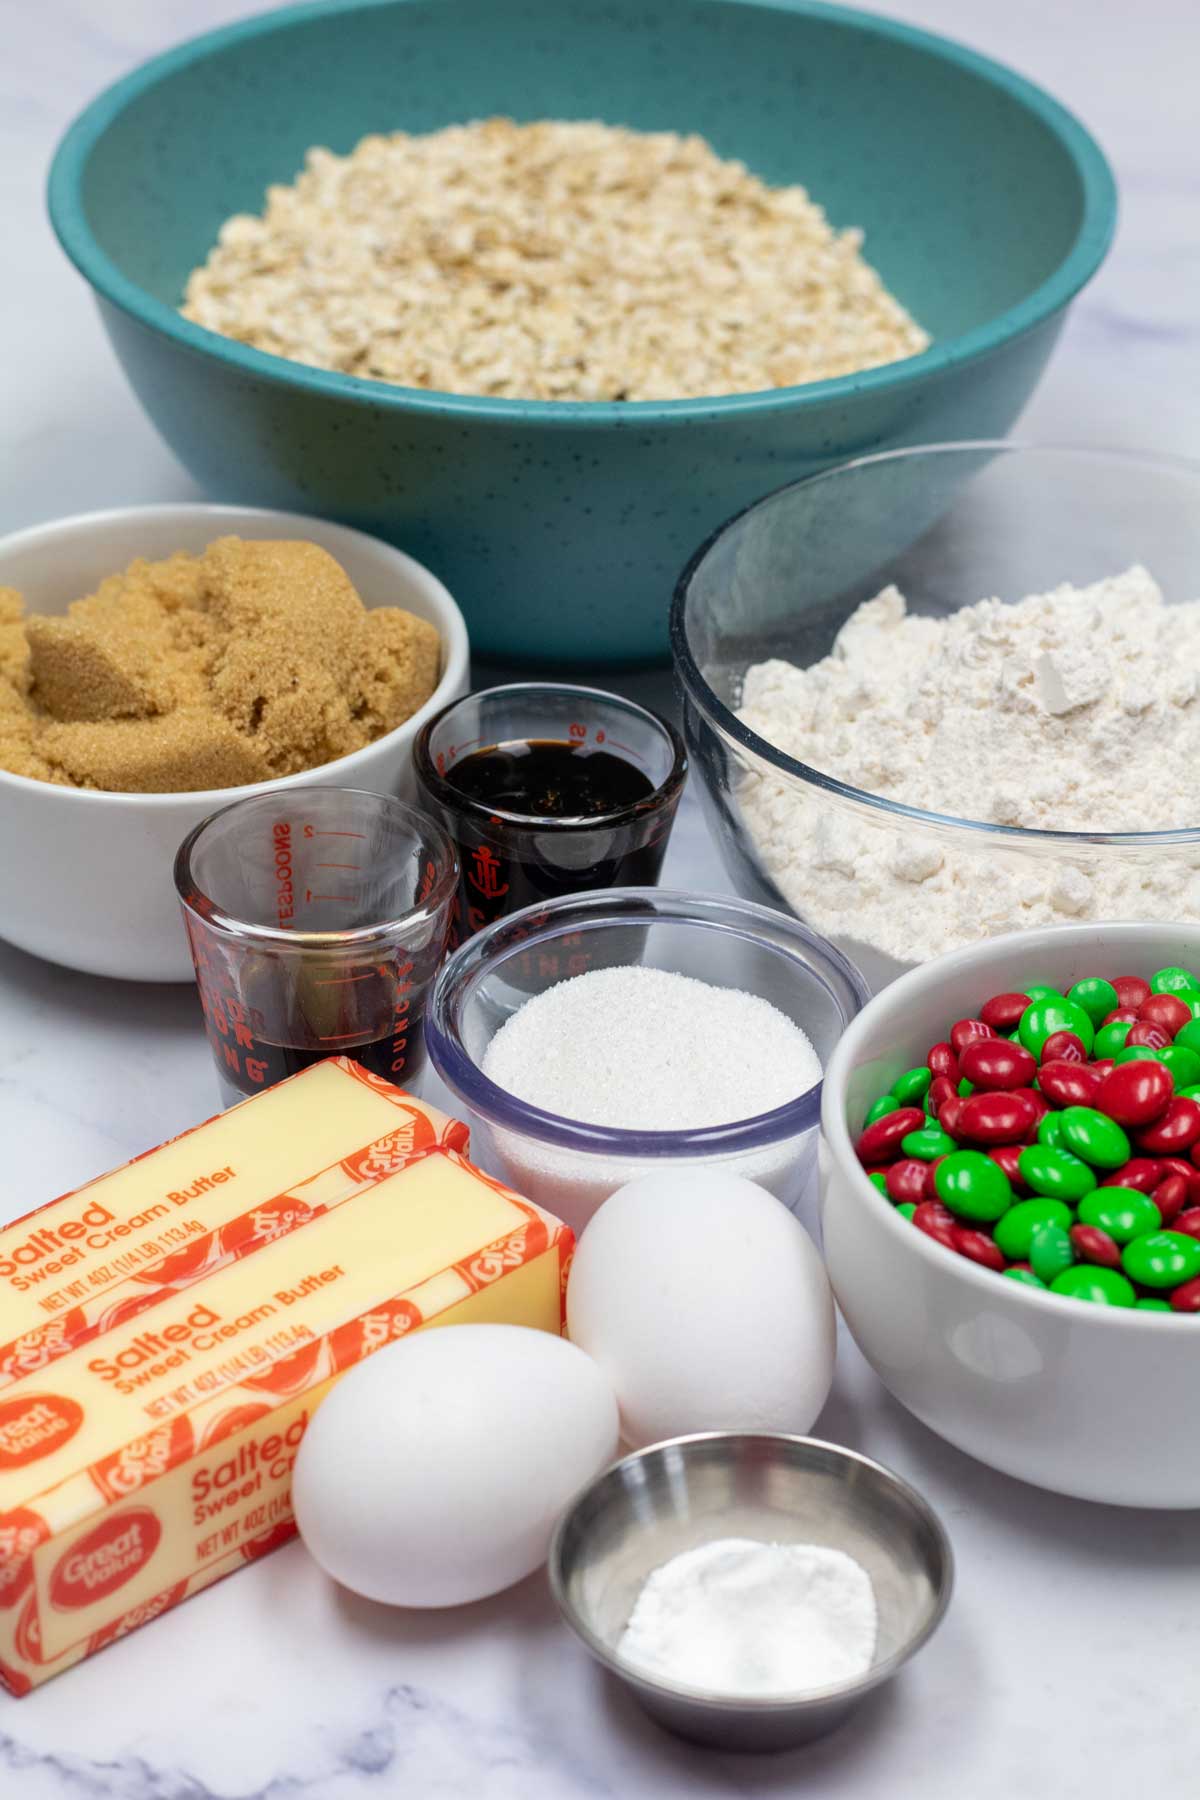 Tall image showing ingredients needed for Christmas M&M oatmeal cookies.